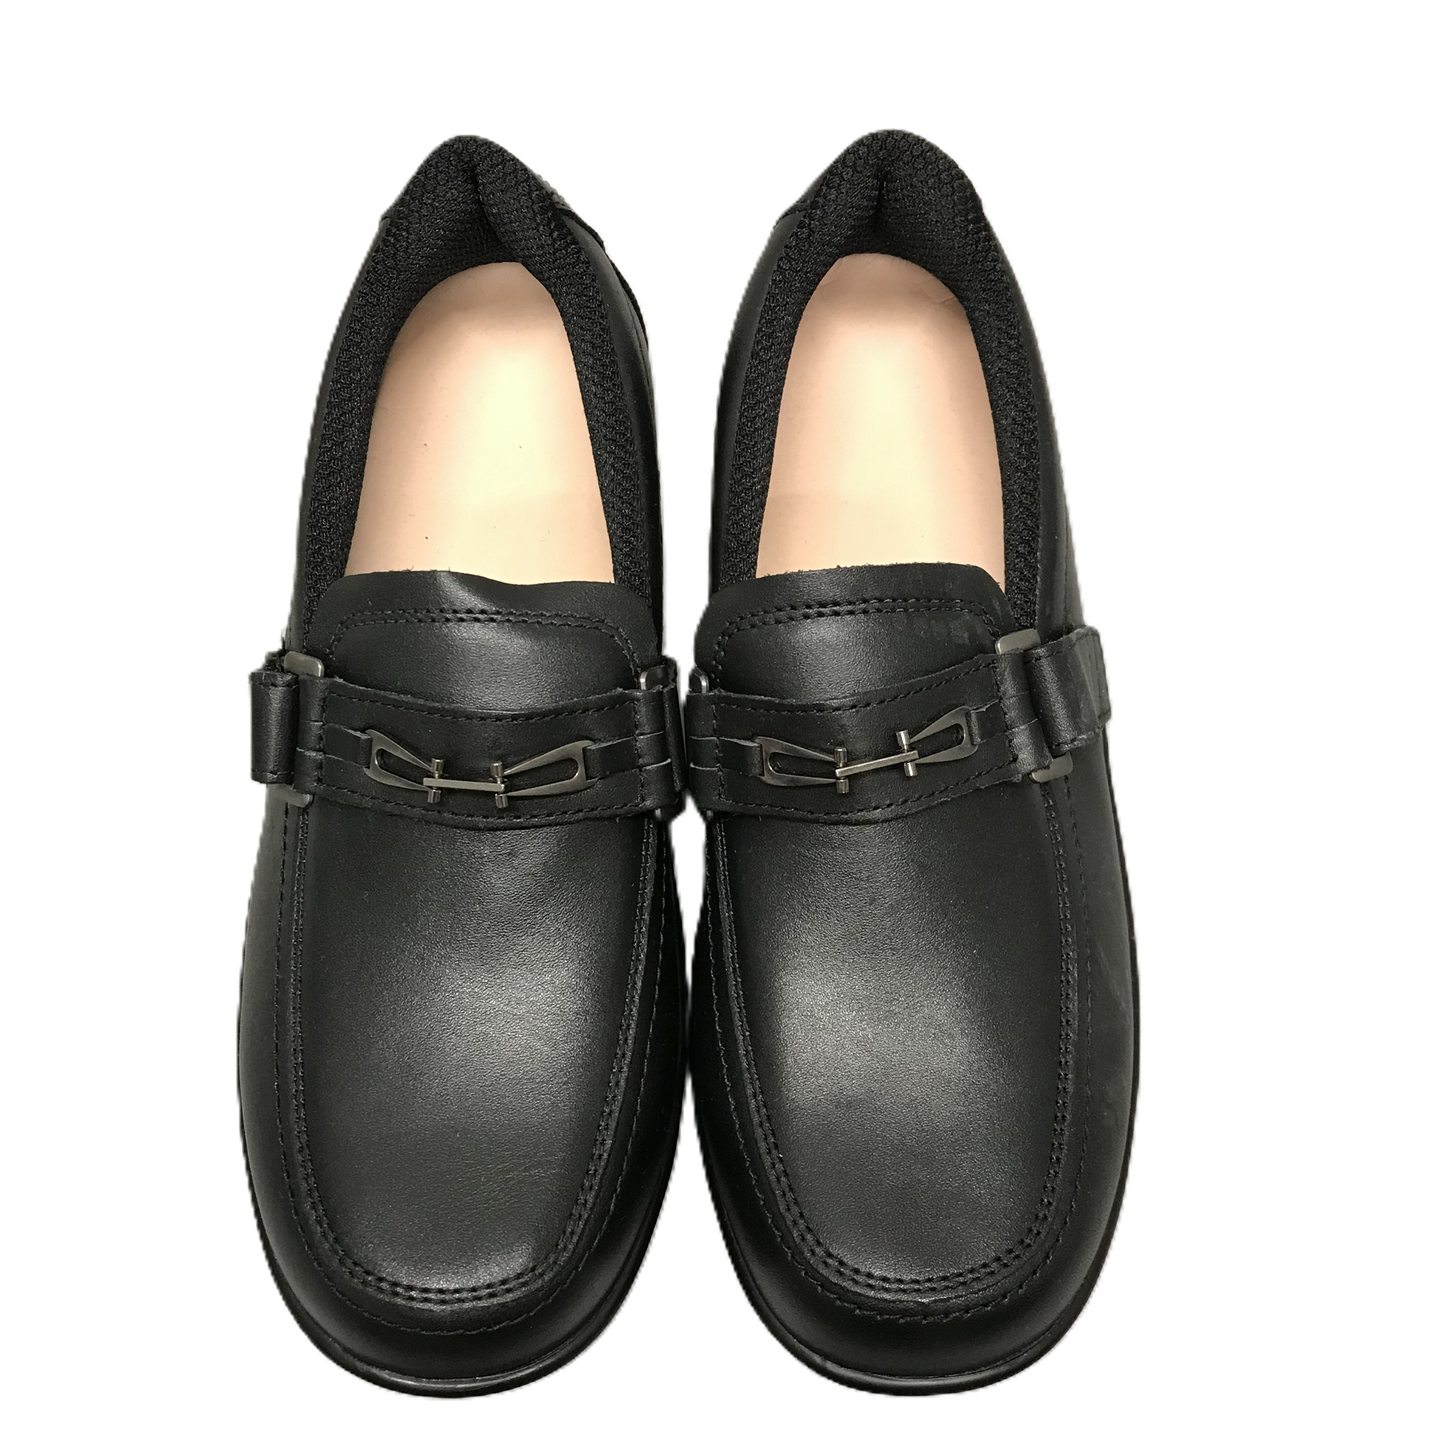 Black Shoes Flats By Ortho Feet, Size: 9